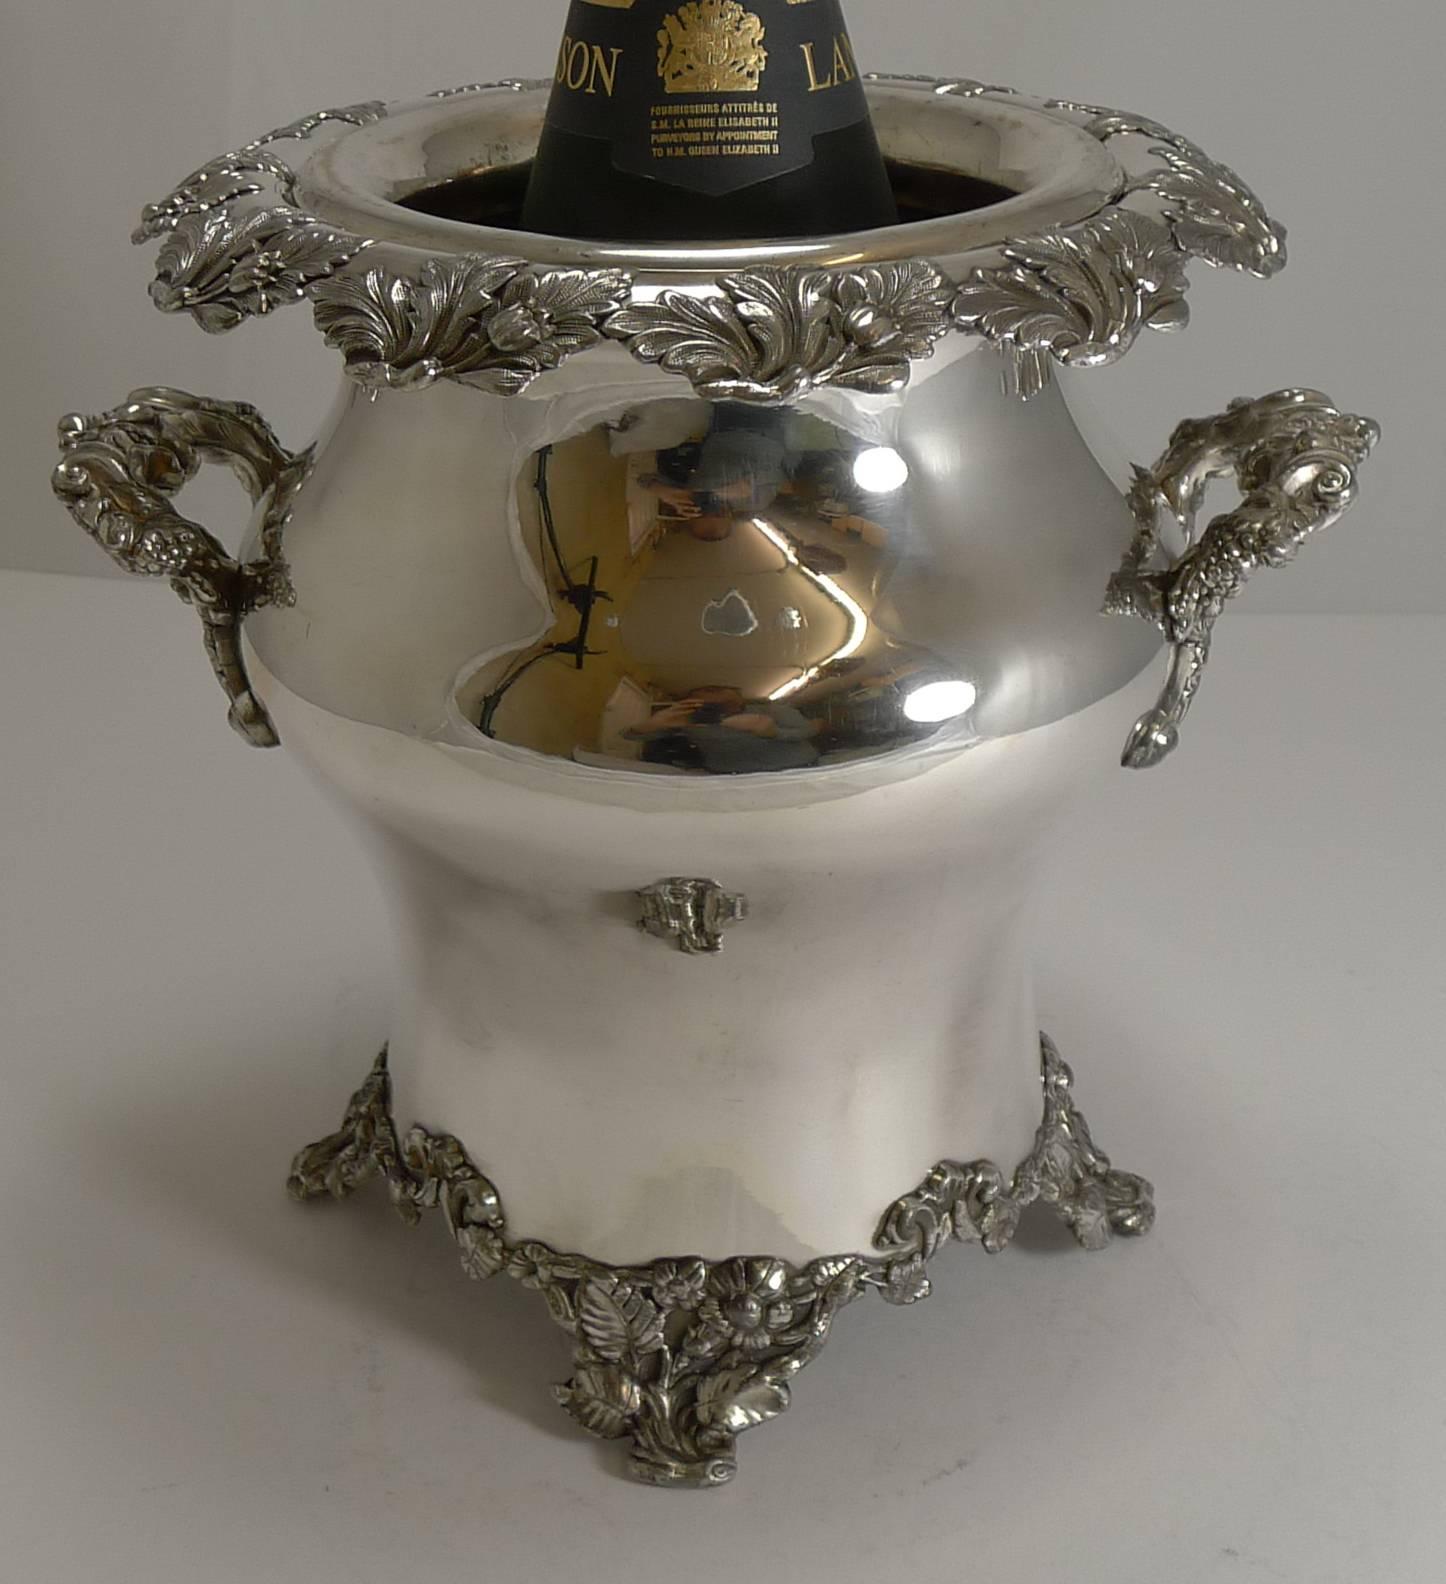 A stunning early Victorian wine cooler, made from Old Sheffield plate and standing on the most wonderful naturalistic footed base. The shape is beautiful and more unusual than most examples.

Complete with the original liner, it remains in